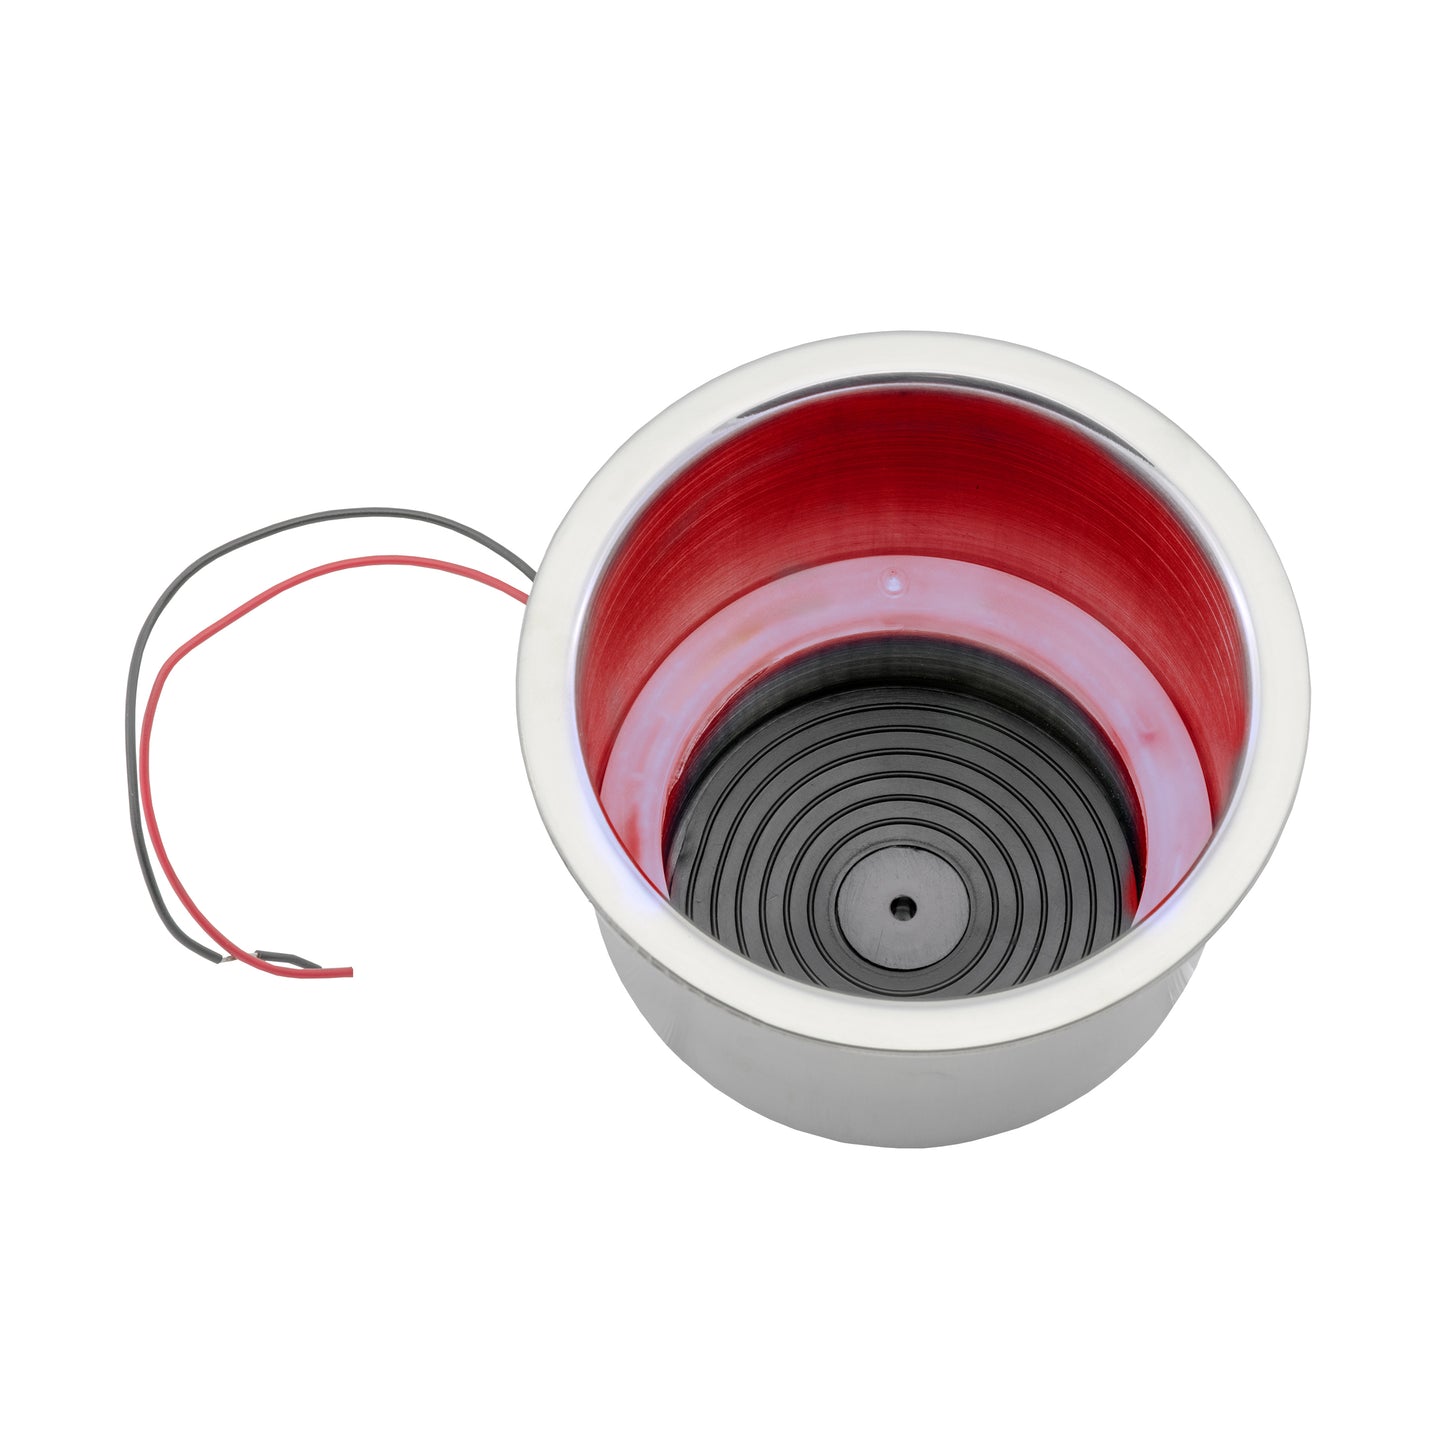 Stainless Steel Flush Drink Holder with Red LED Light - S-3511R